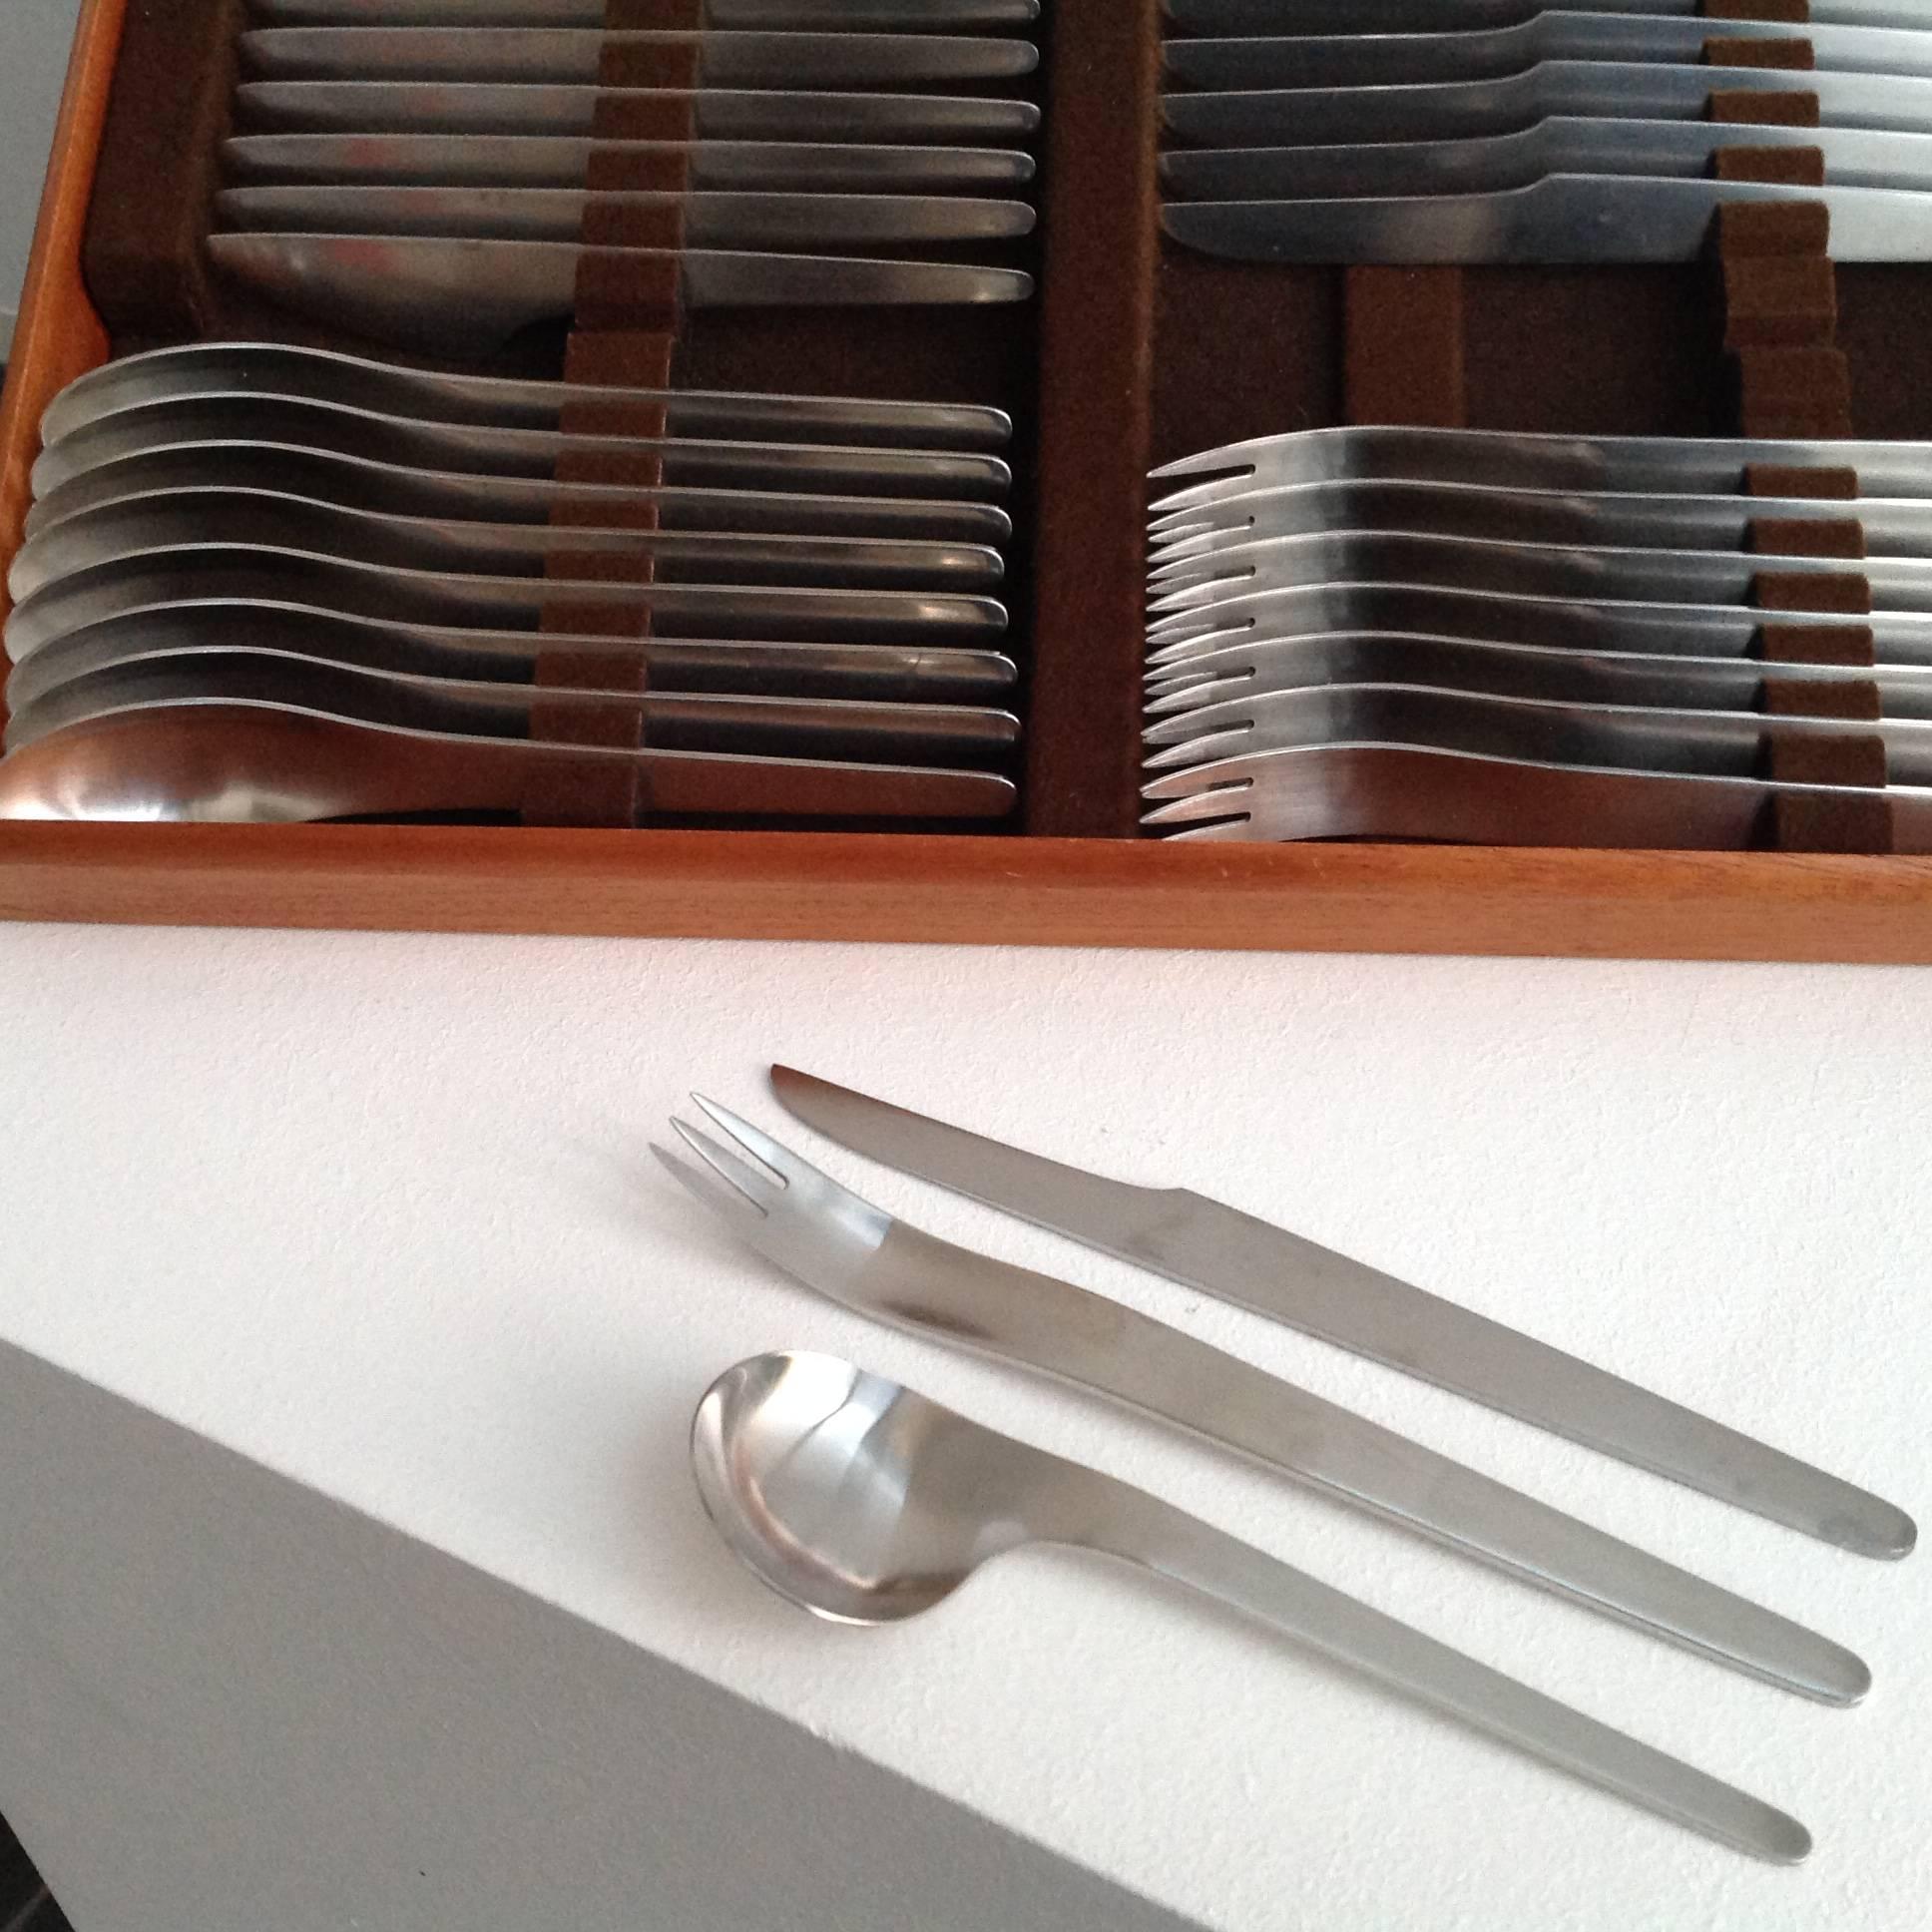 Stainless Steel Arne Jacobsen Designed Flatware for Eight Made by a. Michelsen in Very Good Cond